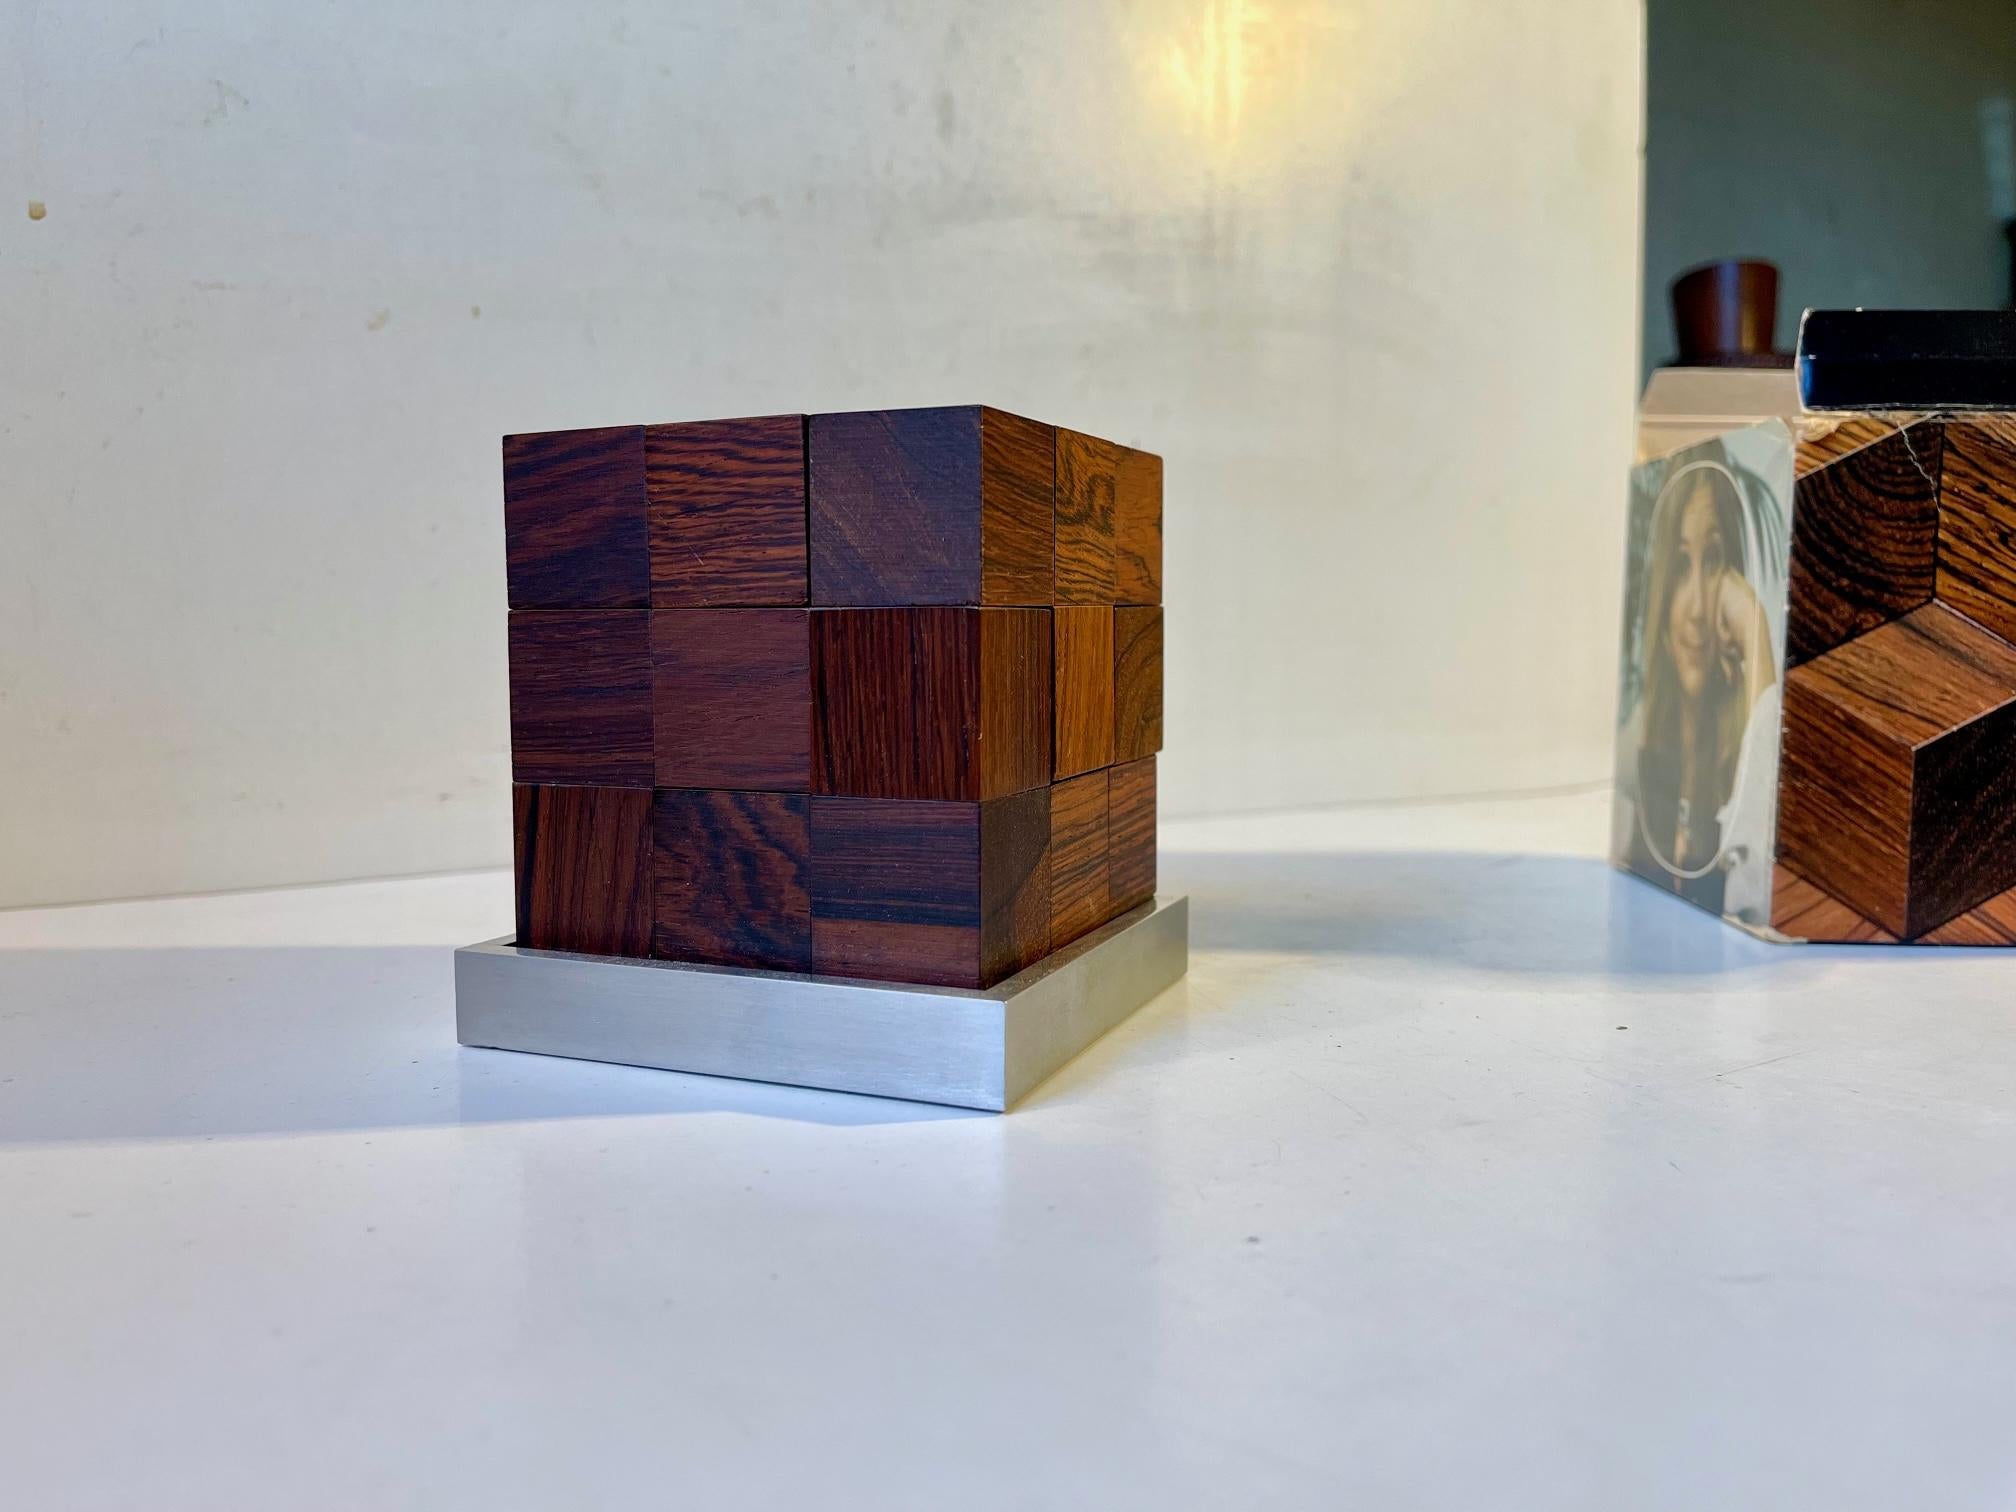 A rare Advanced Cube Puzzle designed by Piet Hein (1905-1996) in the late 1950s and manufactured by Skjode in Skjern, Denmark, during the 1960s. It is called soma and is executed in Rosewood, Wenge wood and aluminium. It comes in its original box